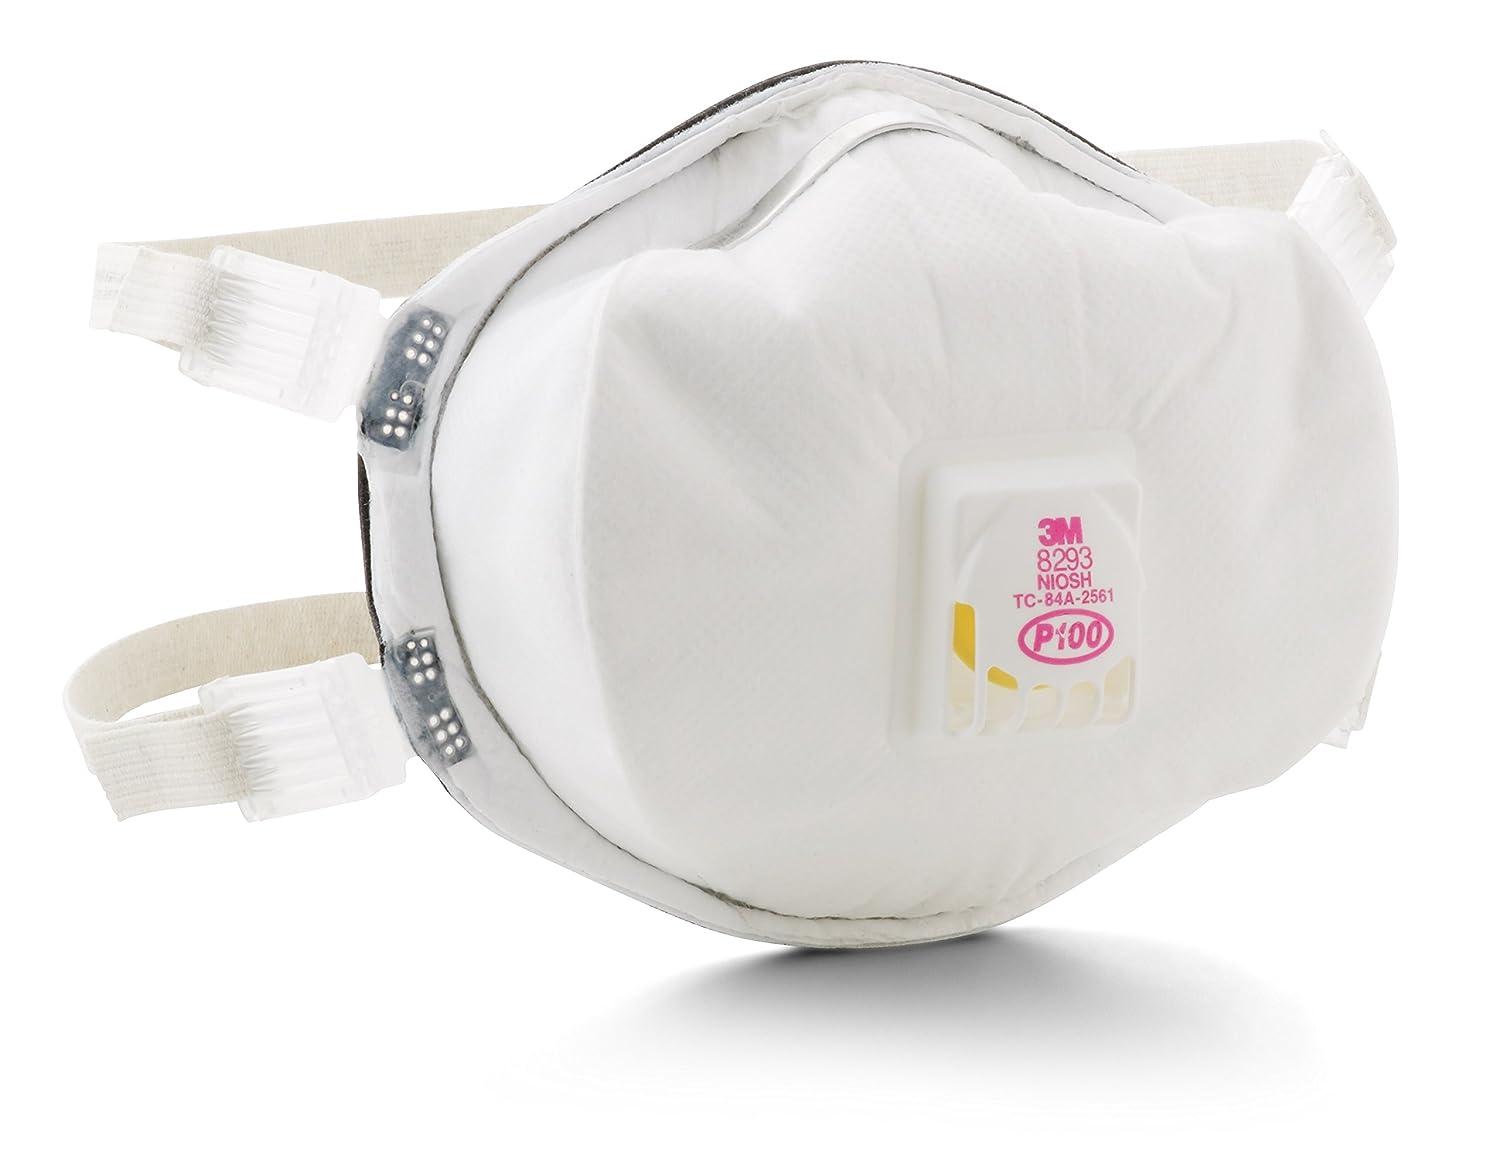 3M P100 Disposable Particulate Cup Respirator for $5.29